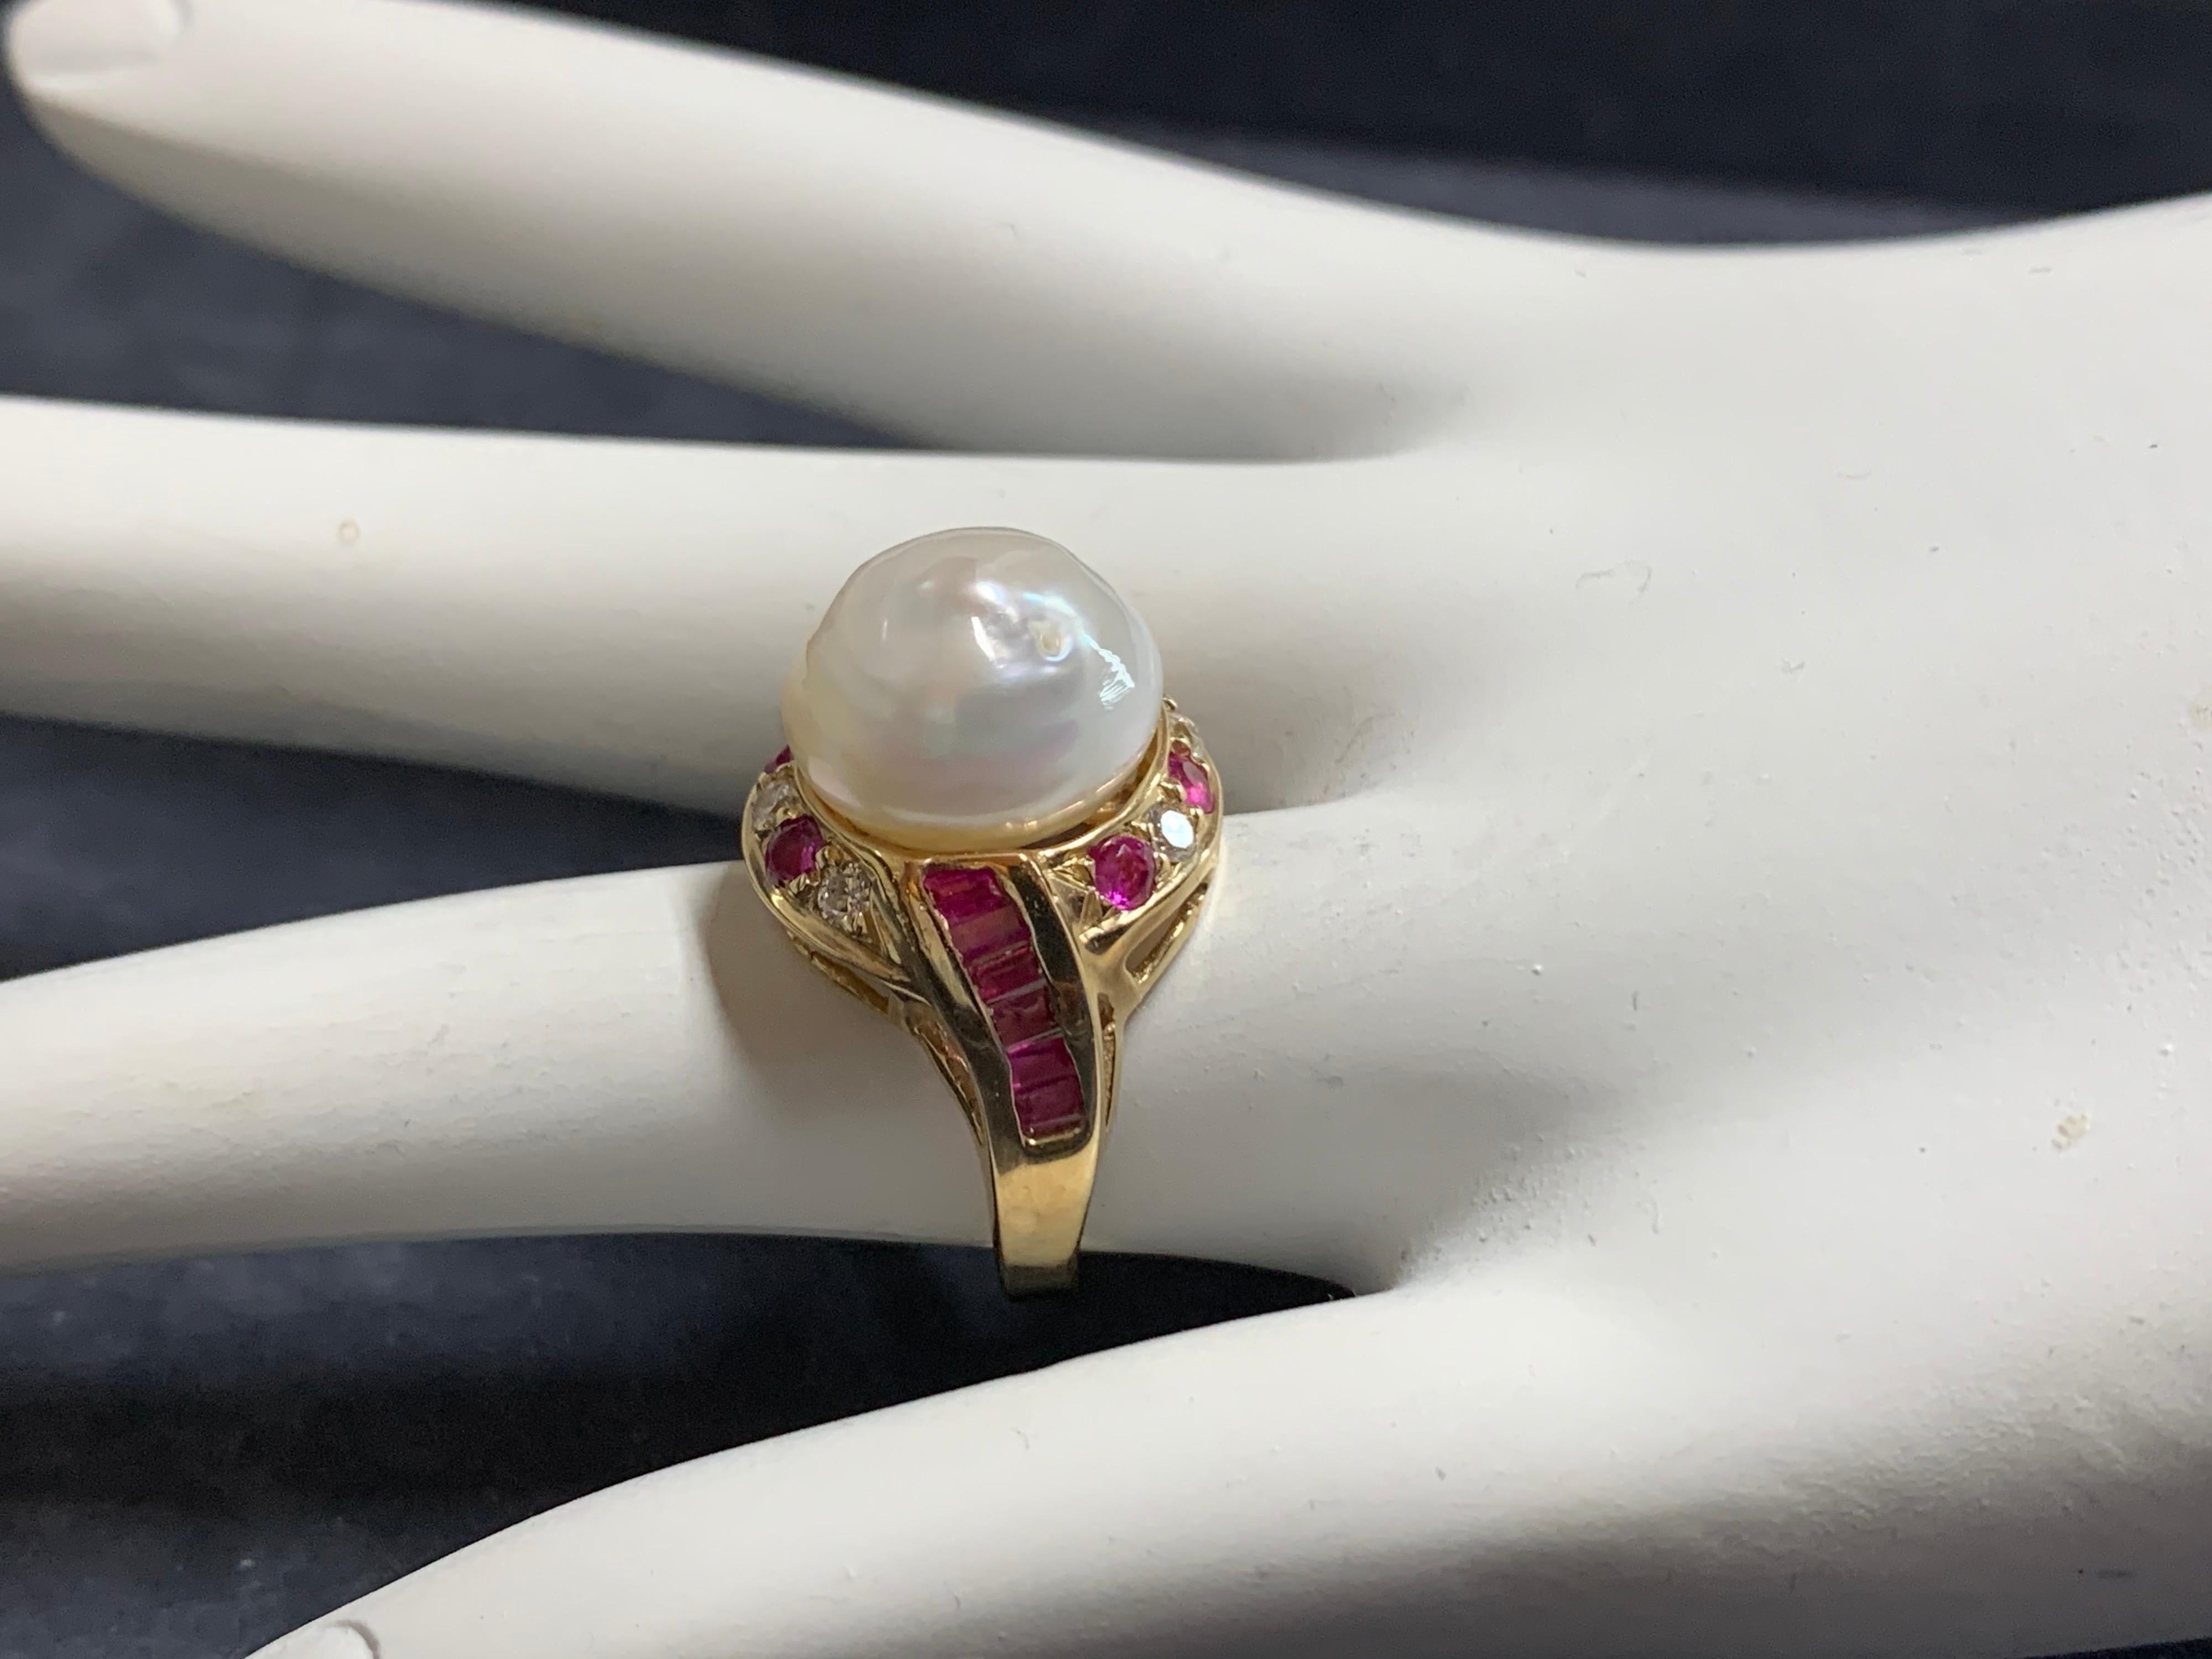 Retro Gold Cocktail Ring 1.4 Carat Natural Ruby, Diamond and Pearl, circa 1950 For Sale 2